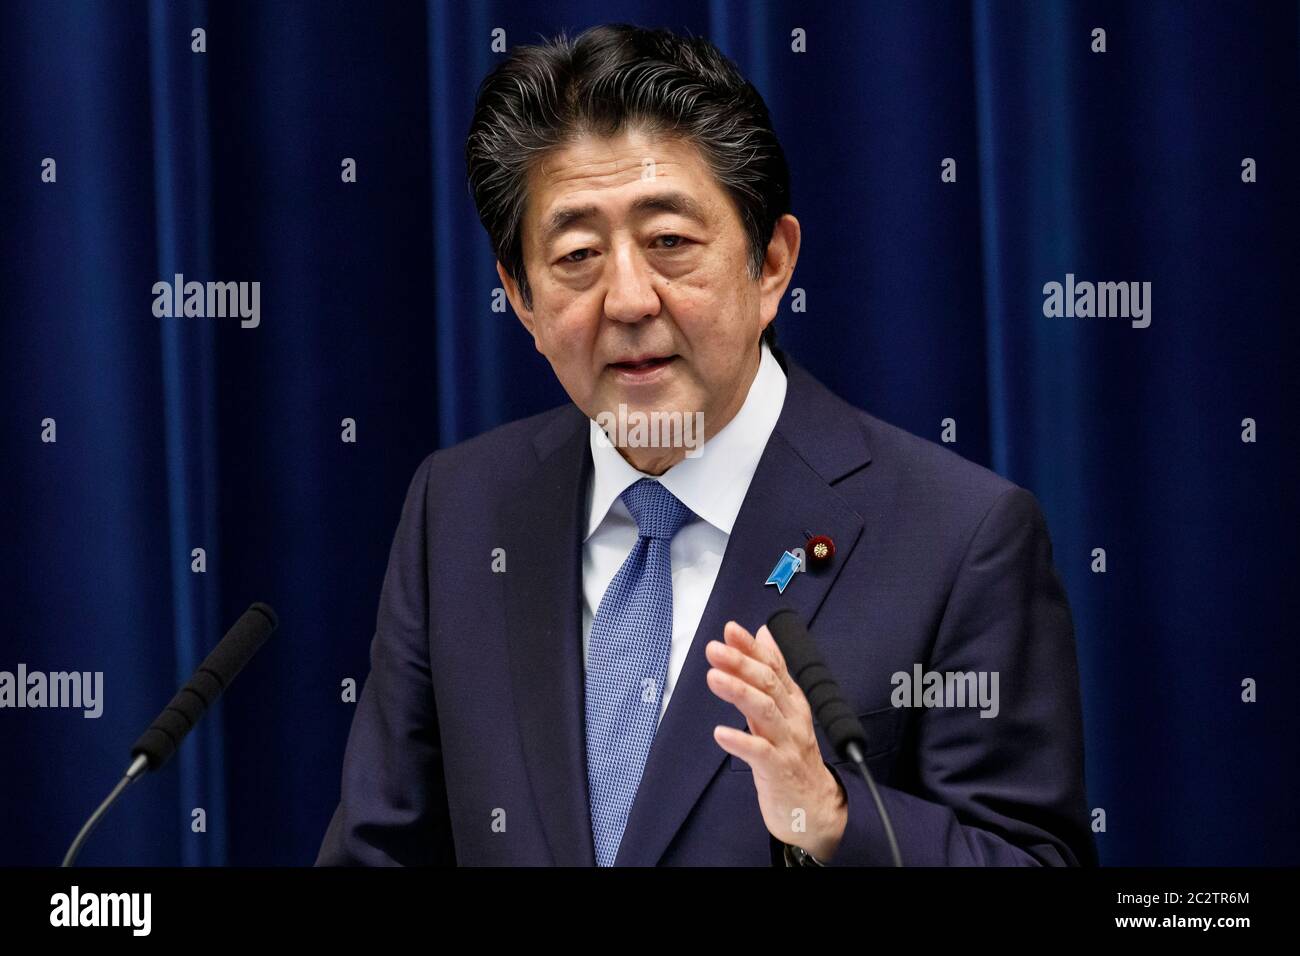 Tokyo, Japan. 18th June, 2020. Japan's Prime Minister Shinzo Abe speaks during a press conference at the prime minister's official residence. Credit: Rodrigo Reyes Marin/ZUMA Wire/Alamy Live News Stock Photo